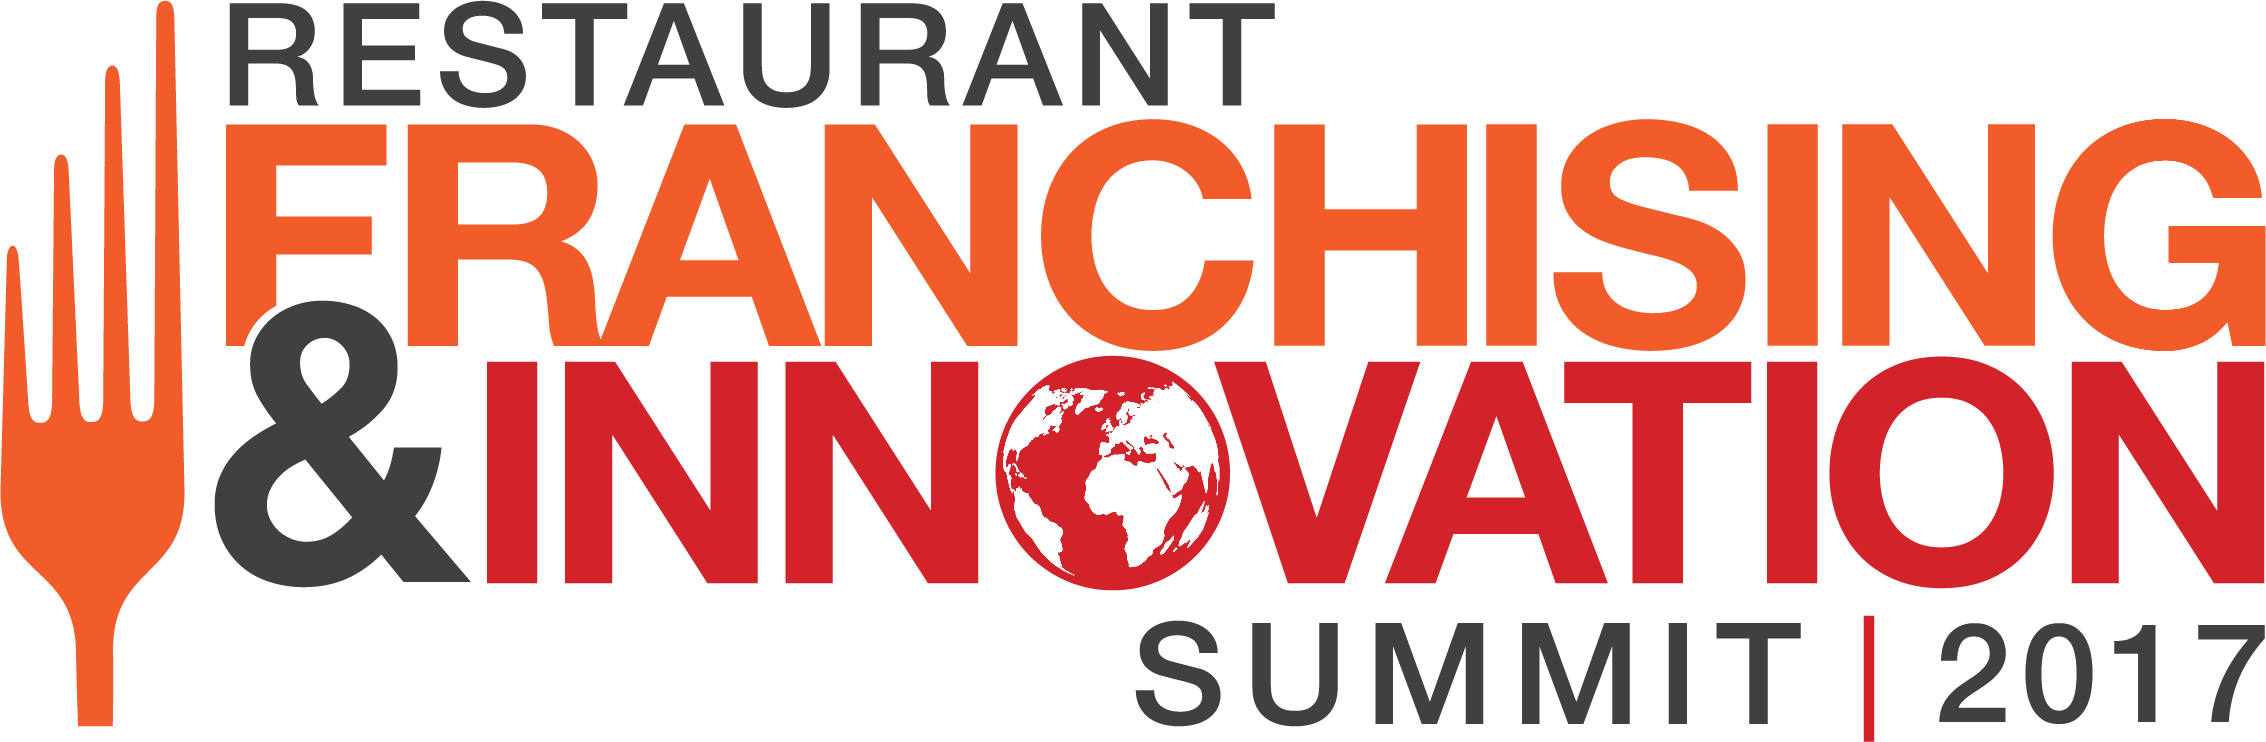 The annual Restaurant Franchising & Innovation Summit will be held March 28–30, 2017, in Dallas. Early bird pricing ends Friday, November 4.